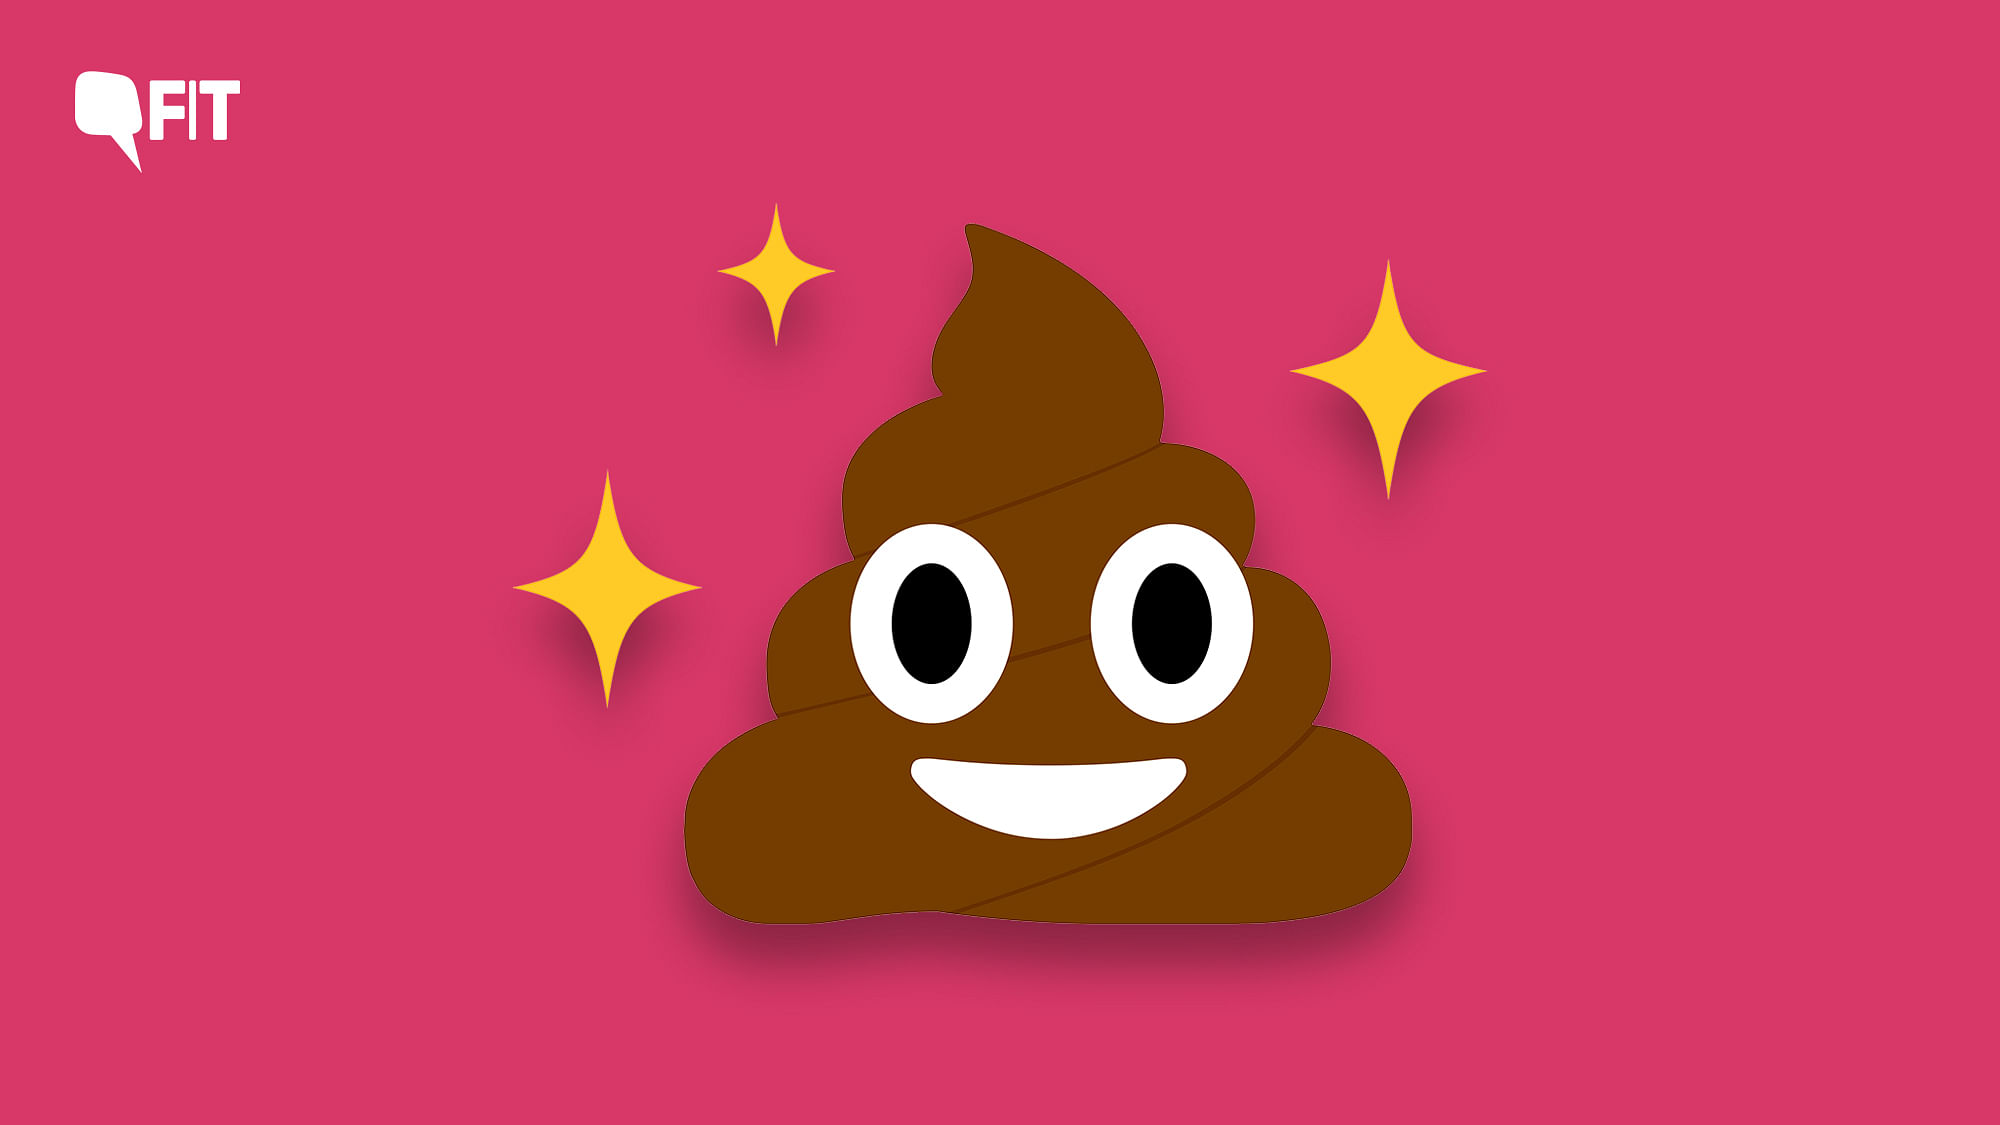 How you poop, when you poop, what your poop looks like can say a lot about your health.